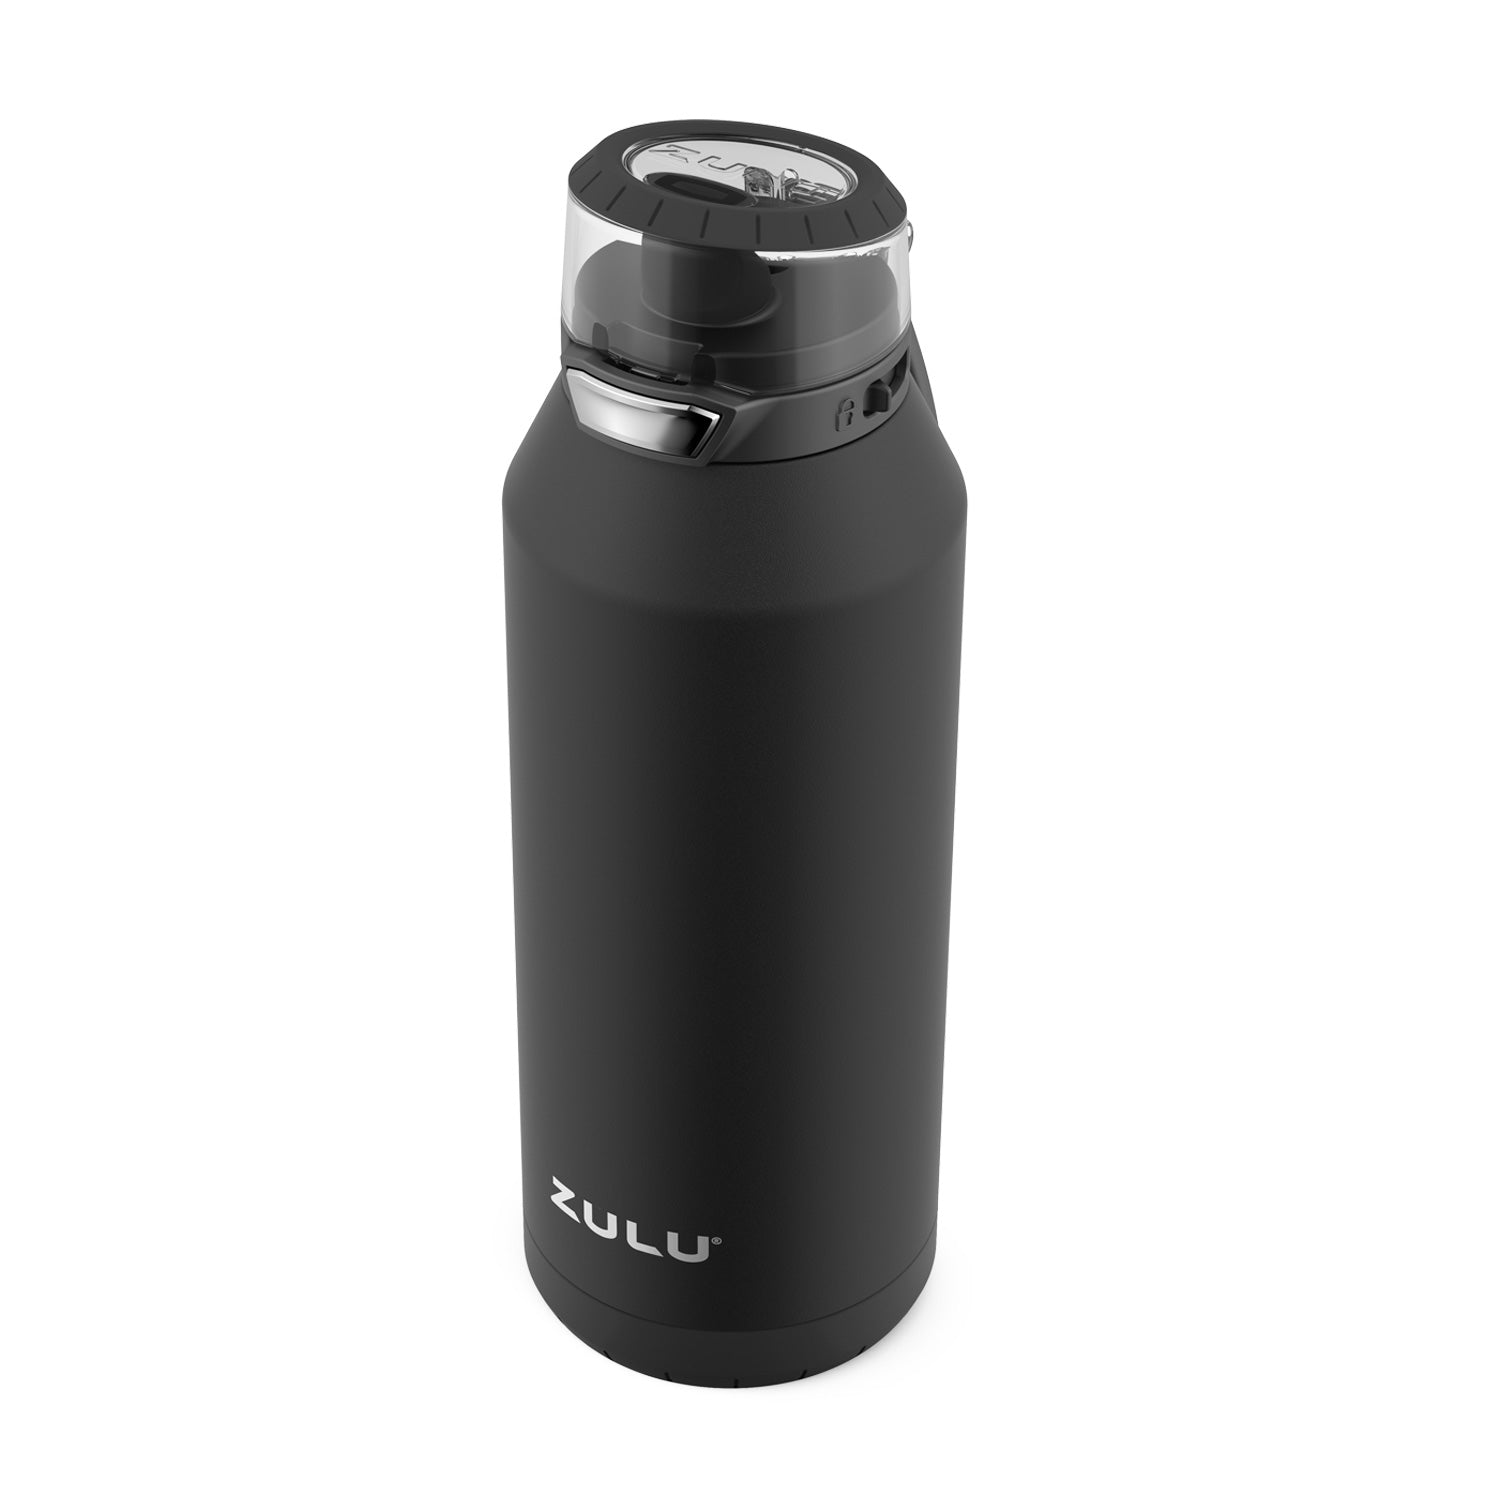 Zulu Athletic Glass water bottle review & Giveaway